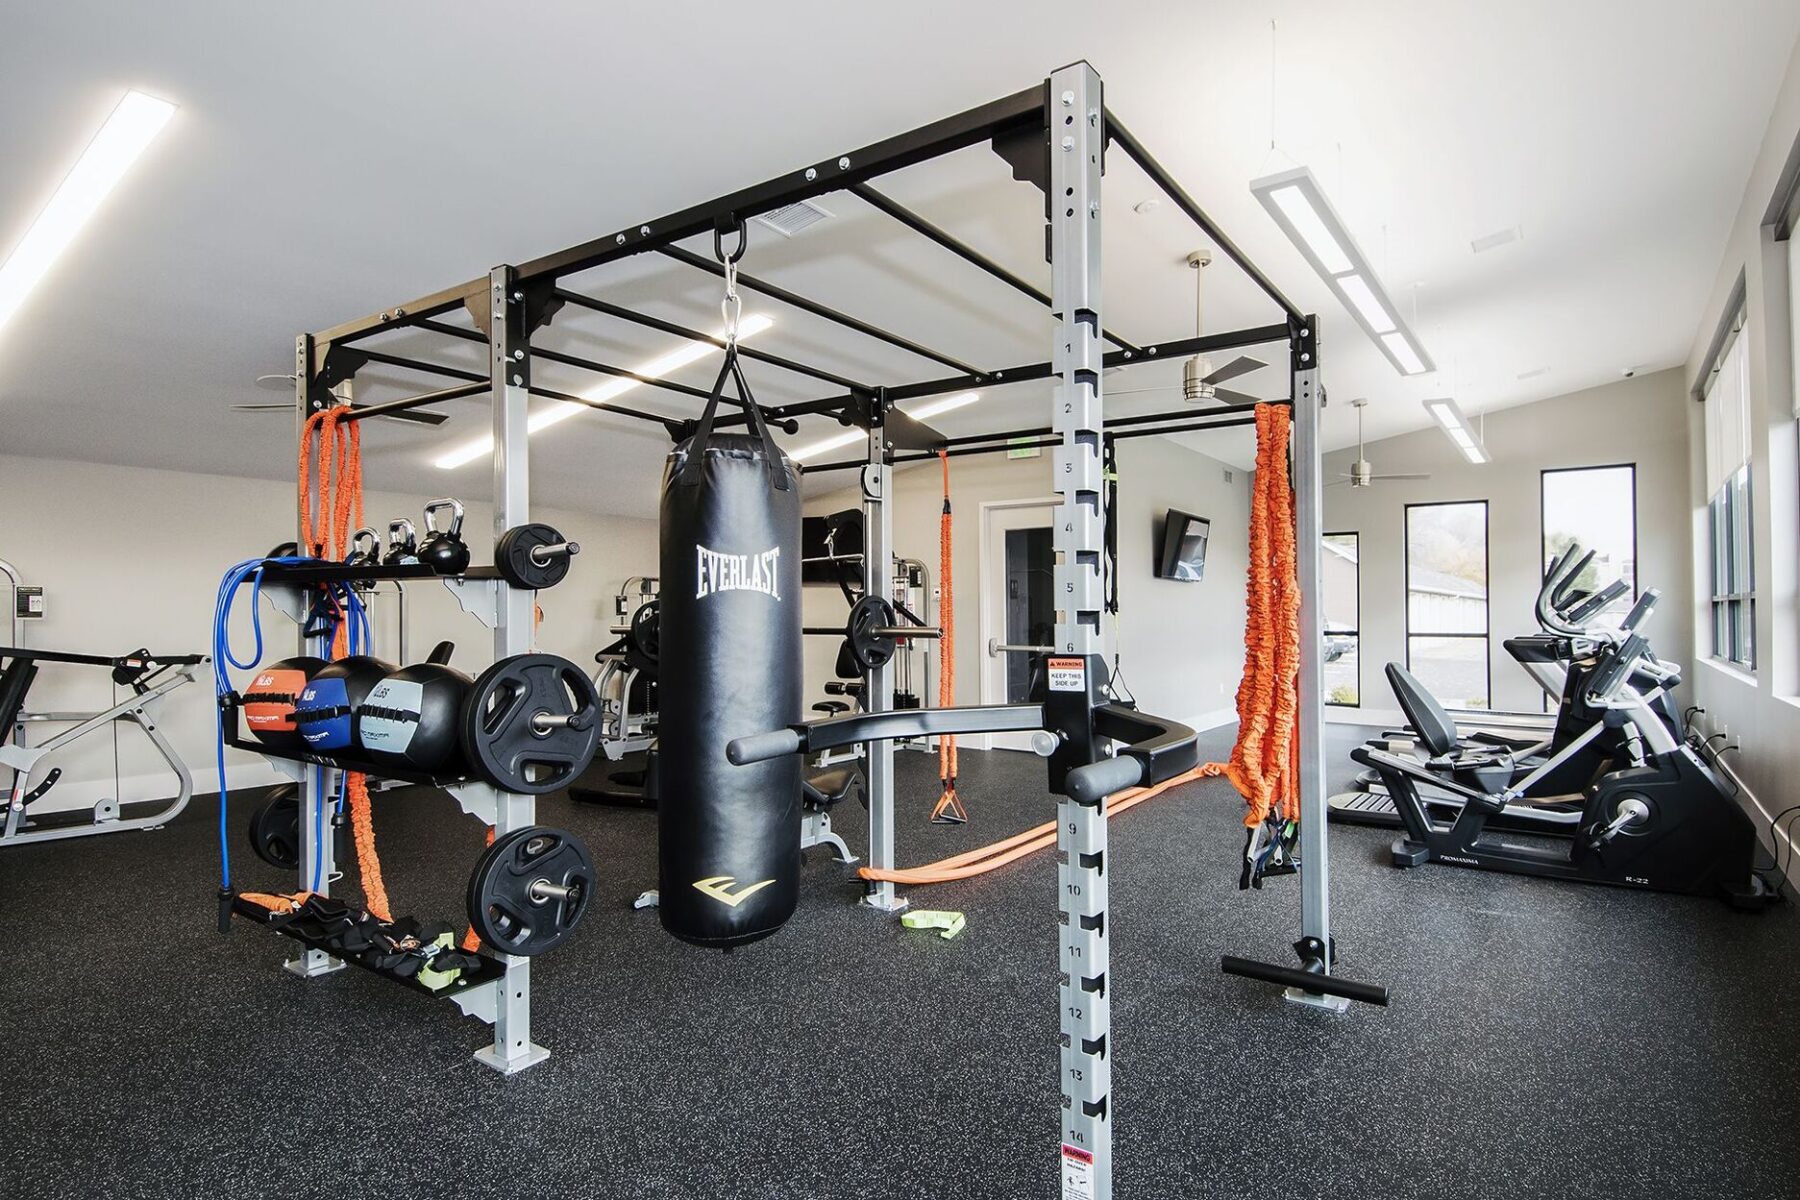 Functional training rack with punching bag, dip station, resistance bands, and battle ropes